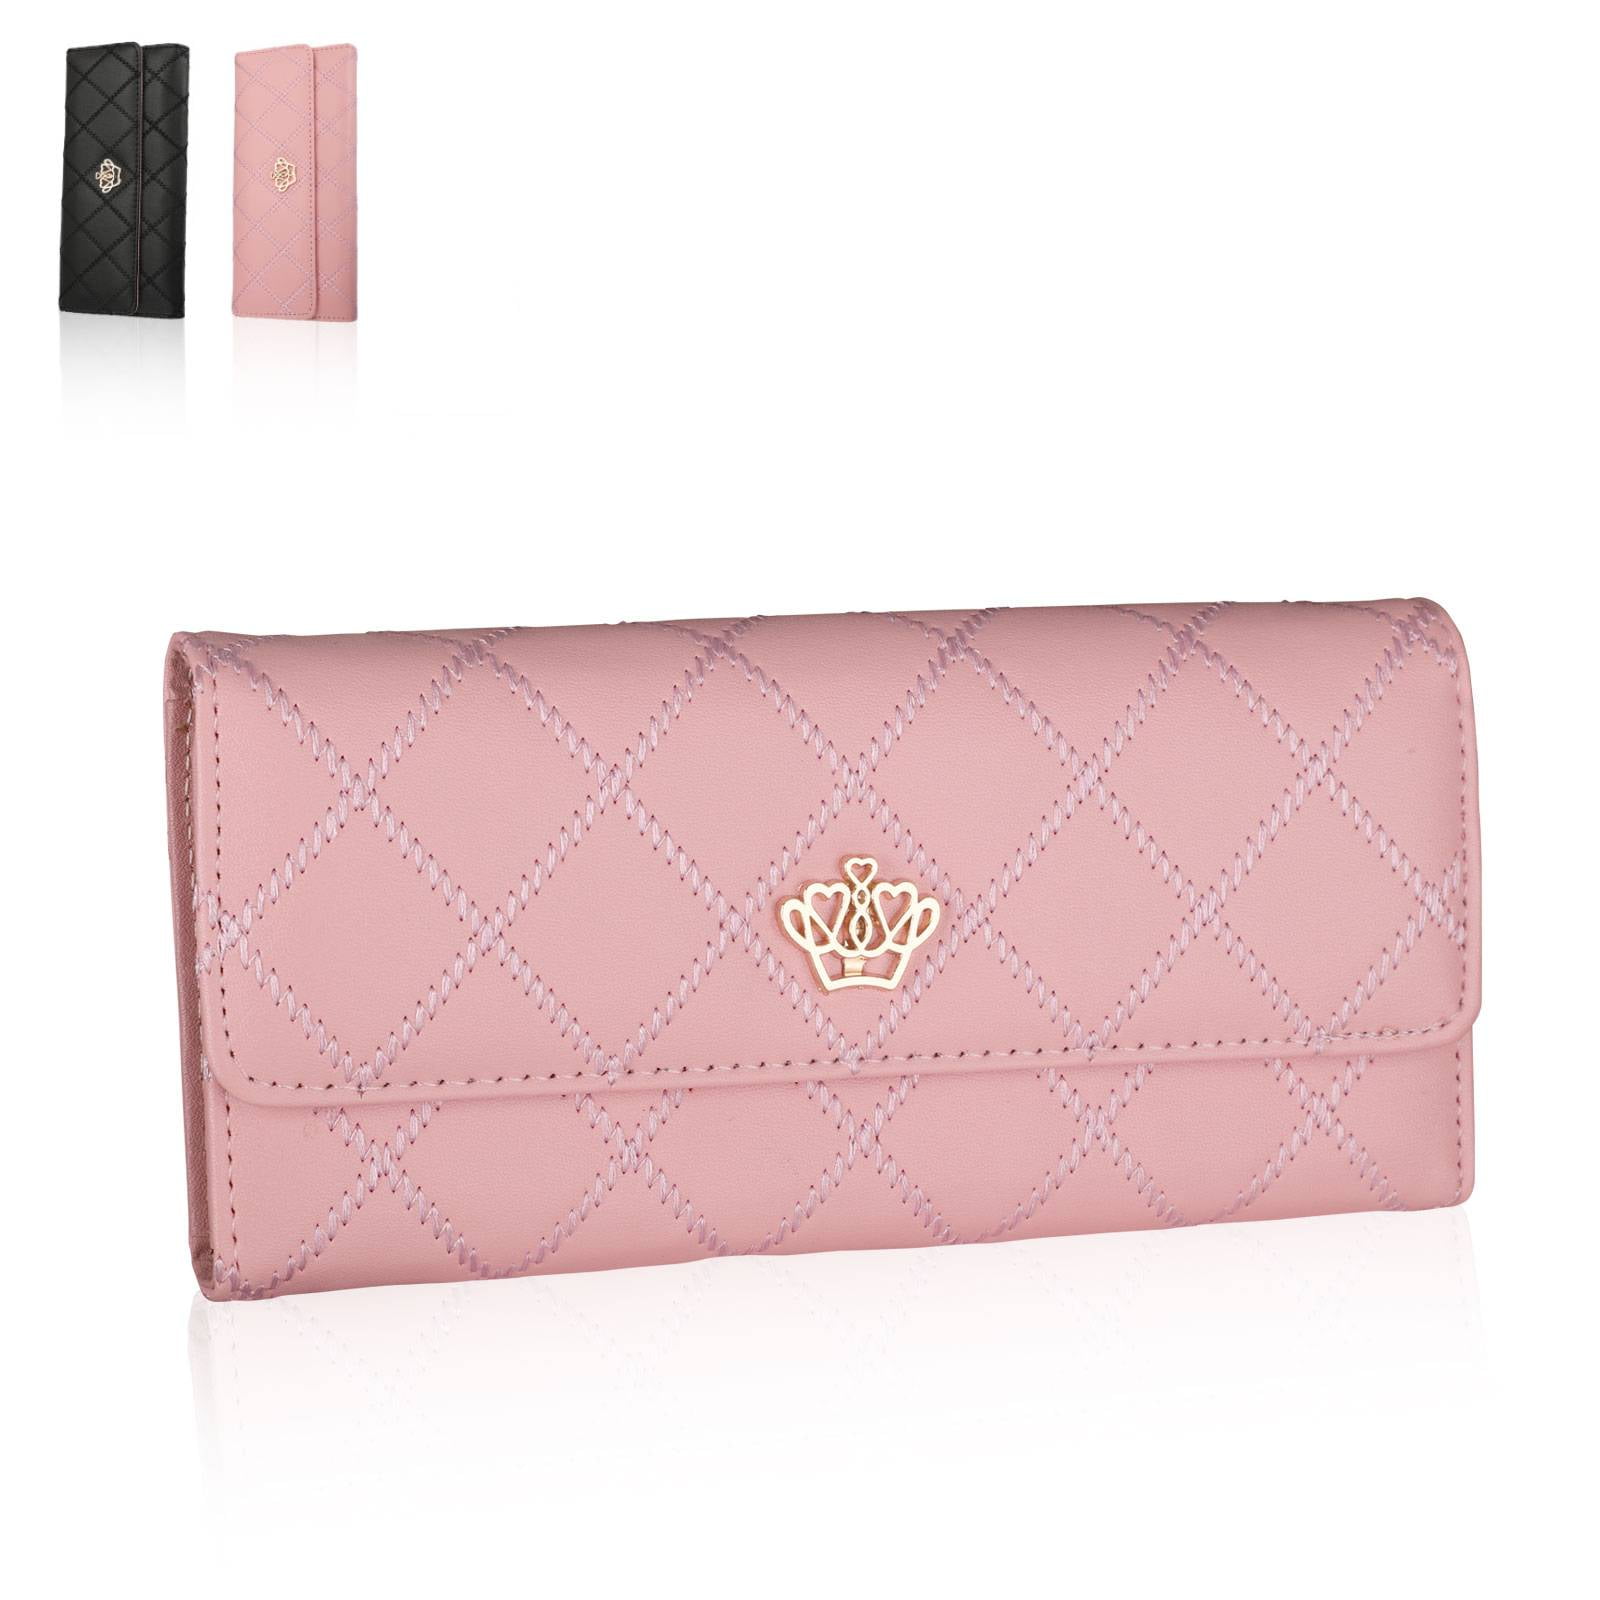 Pu Leather Wallet For Women Tsv Long Clutch Wallet Trifold Ladies Credit Card Holder Large 7894